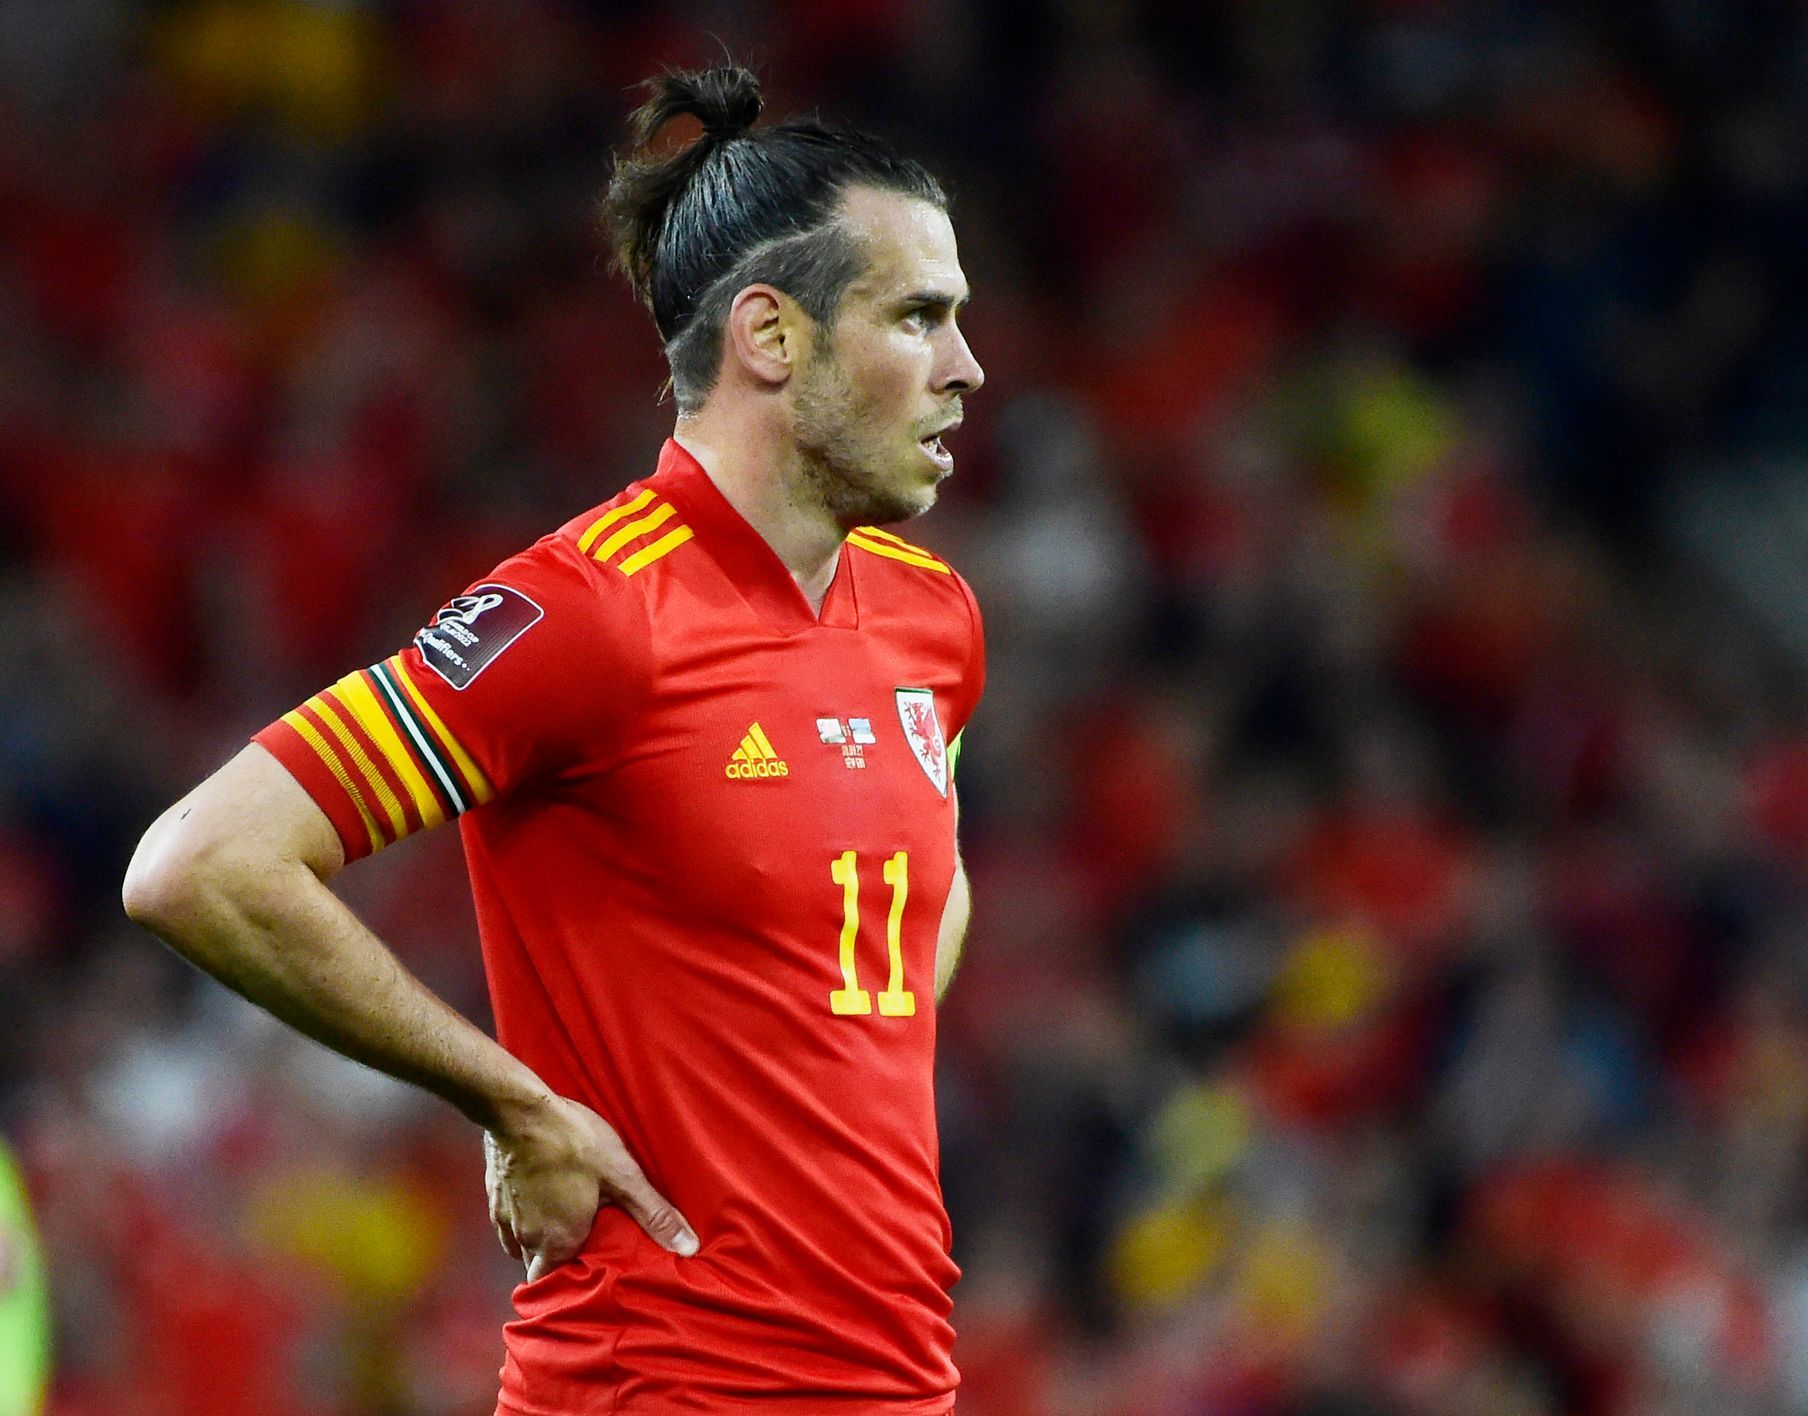 Welsh to miss injured captain Bale in qualifying against Czech footballers